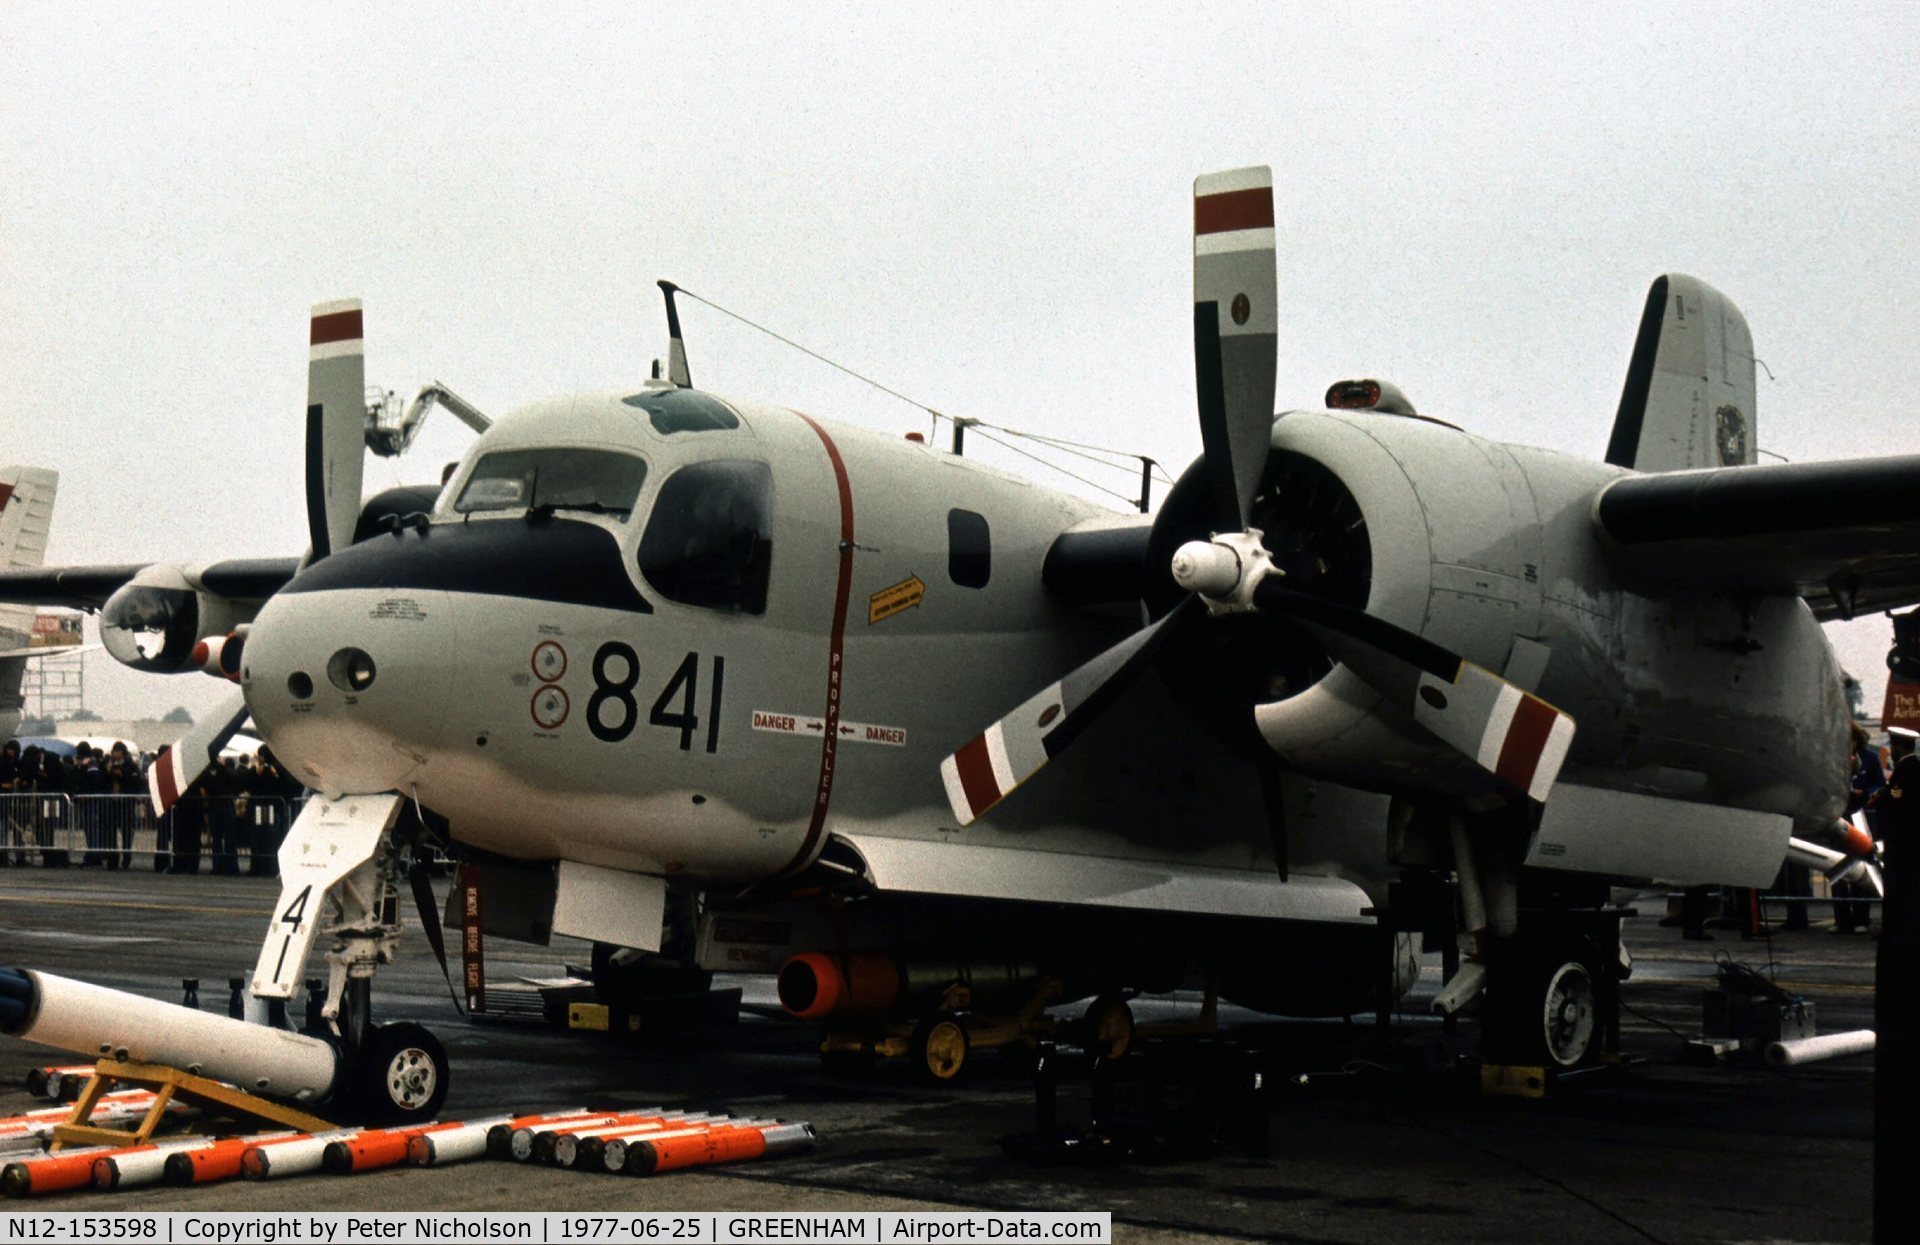 N12-153598, Grumman S-2E Tracker C/N 342C, Another view of the VC-816 Squadron Tracker of the Royal Australian Navy on display at the 1977 Intnl Air Tattoo at RAF Greenham Common.